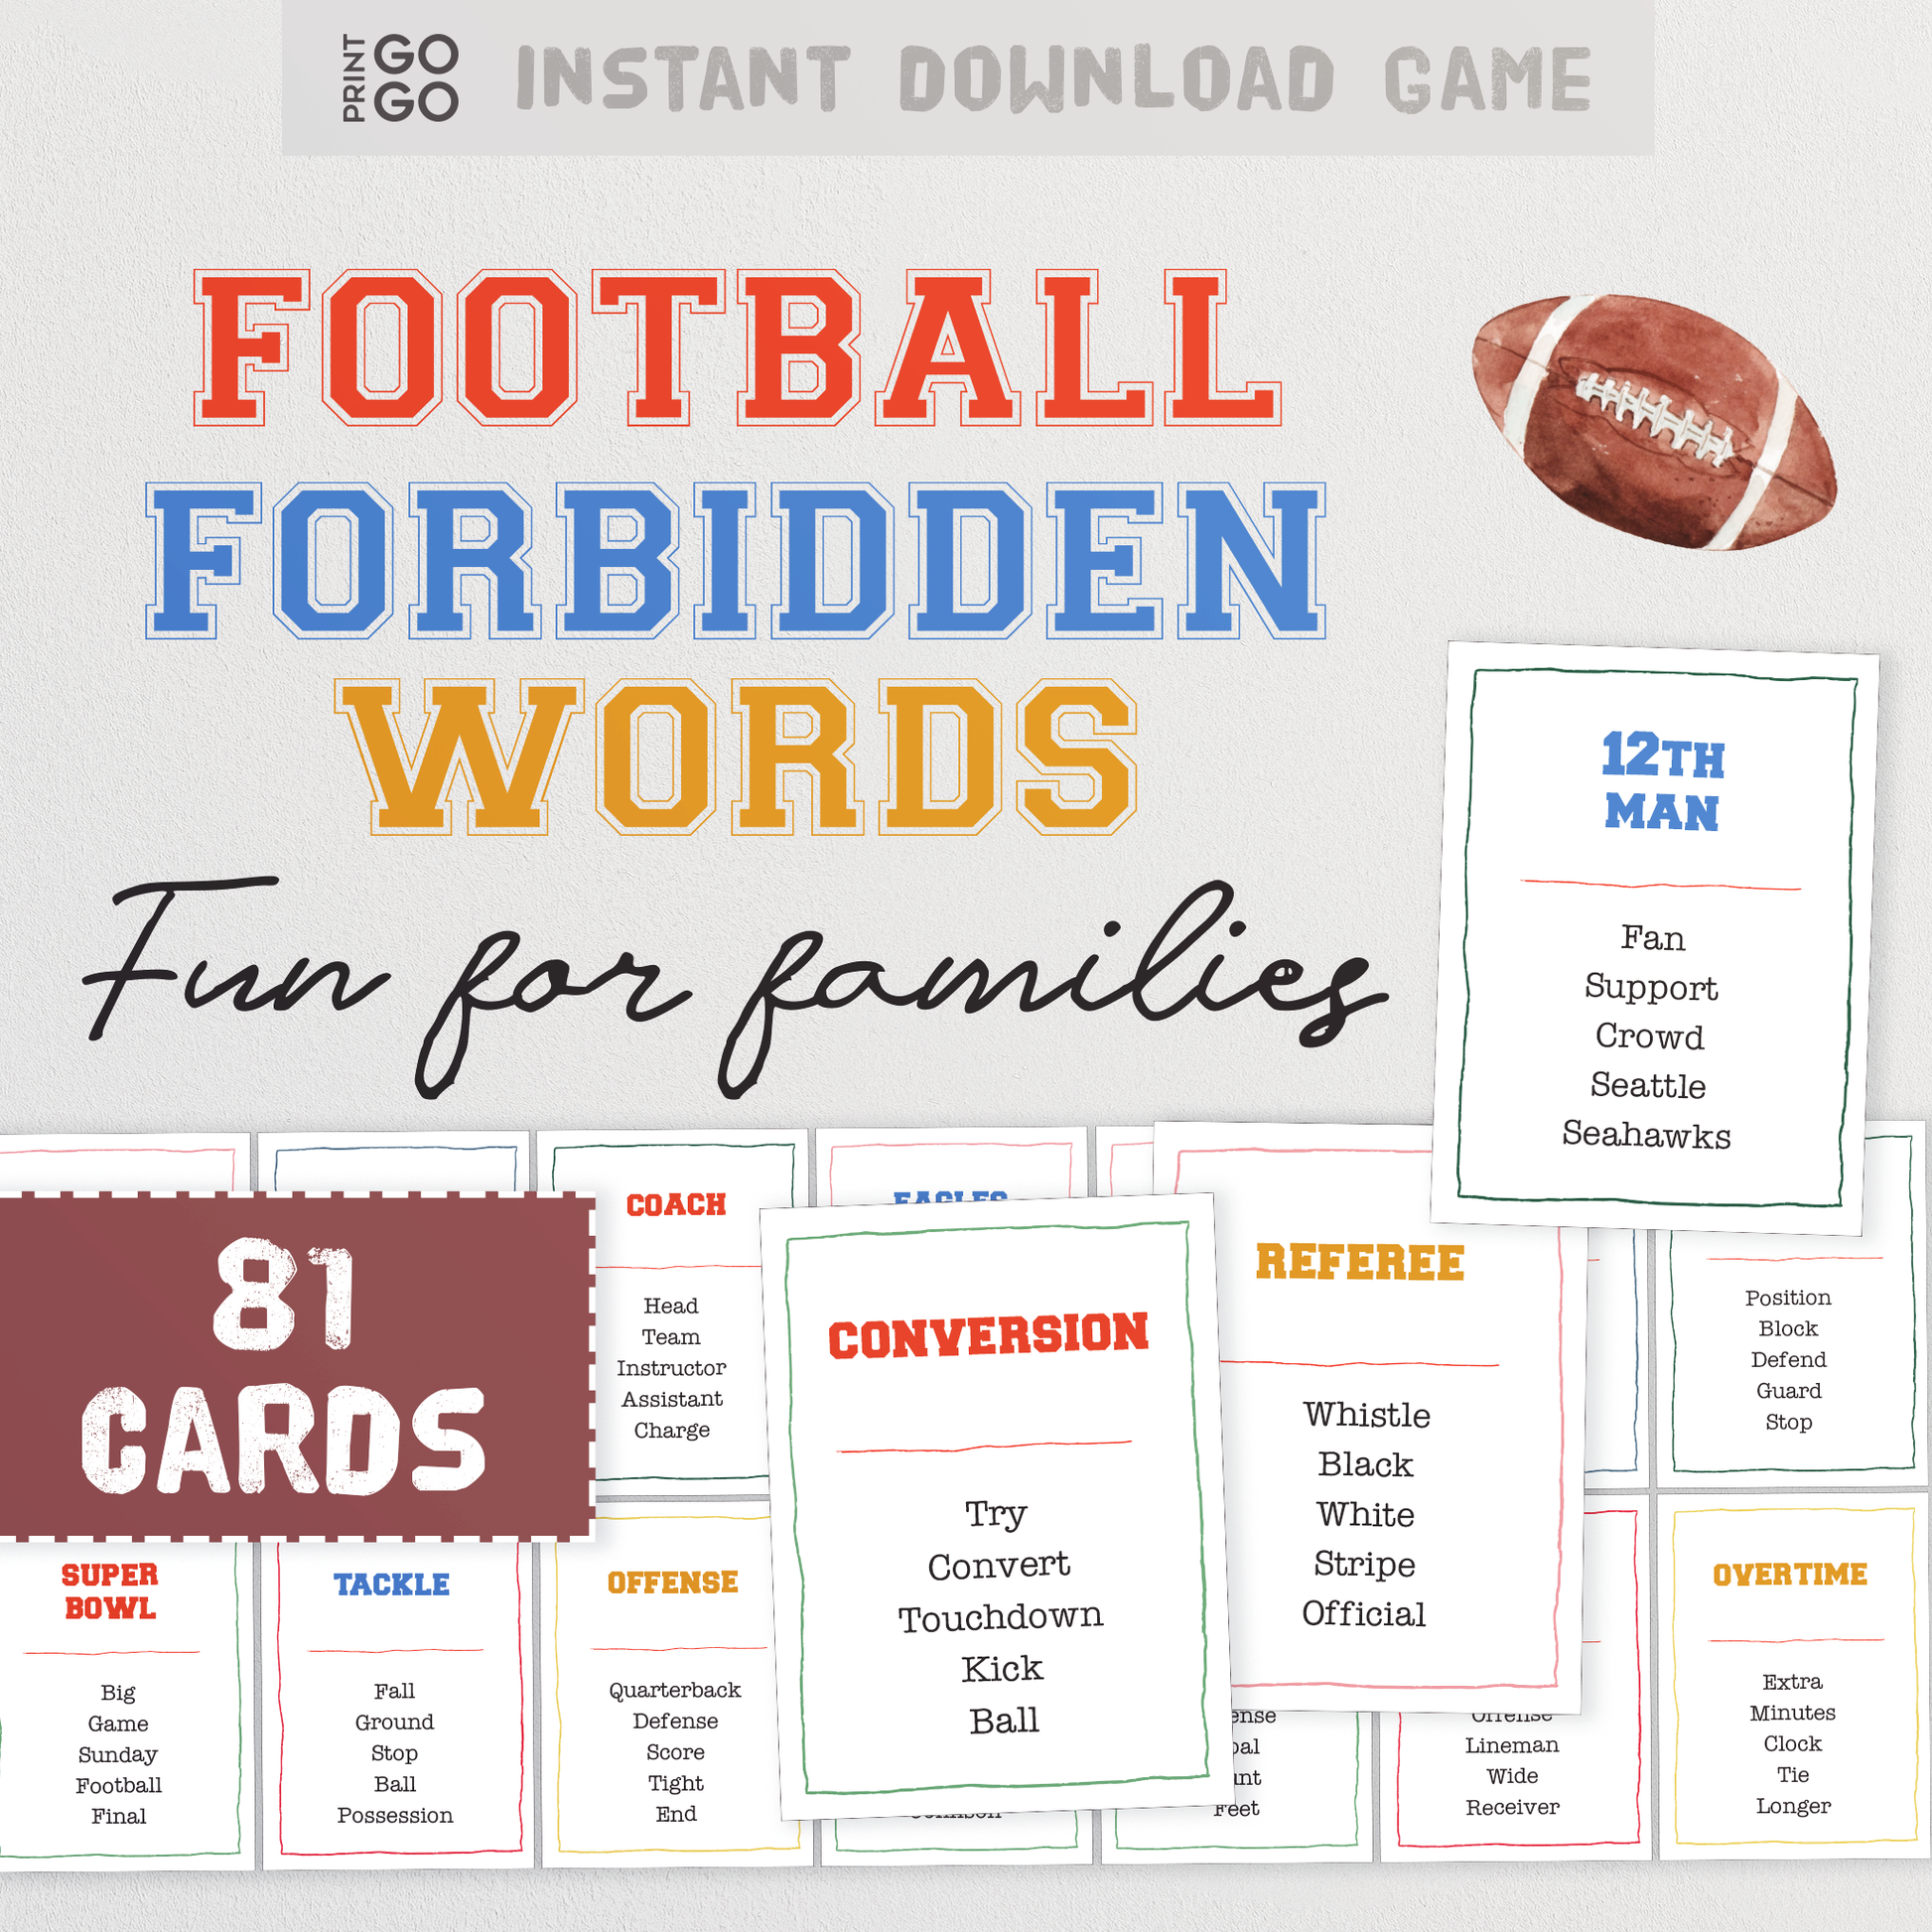 American Football Forbidden Words - The Hilarious Super Bowl Party Game